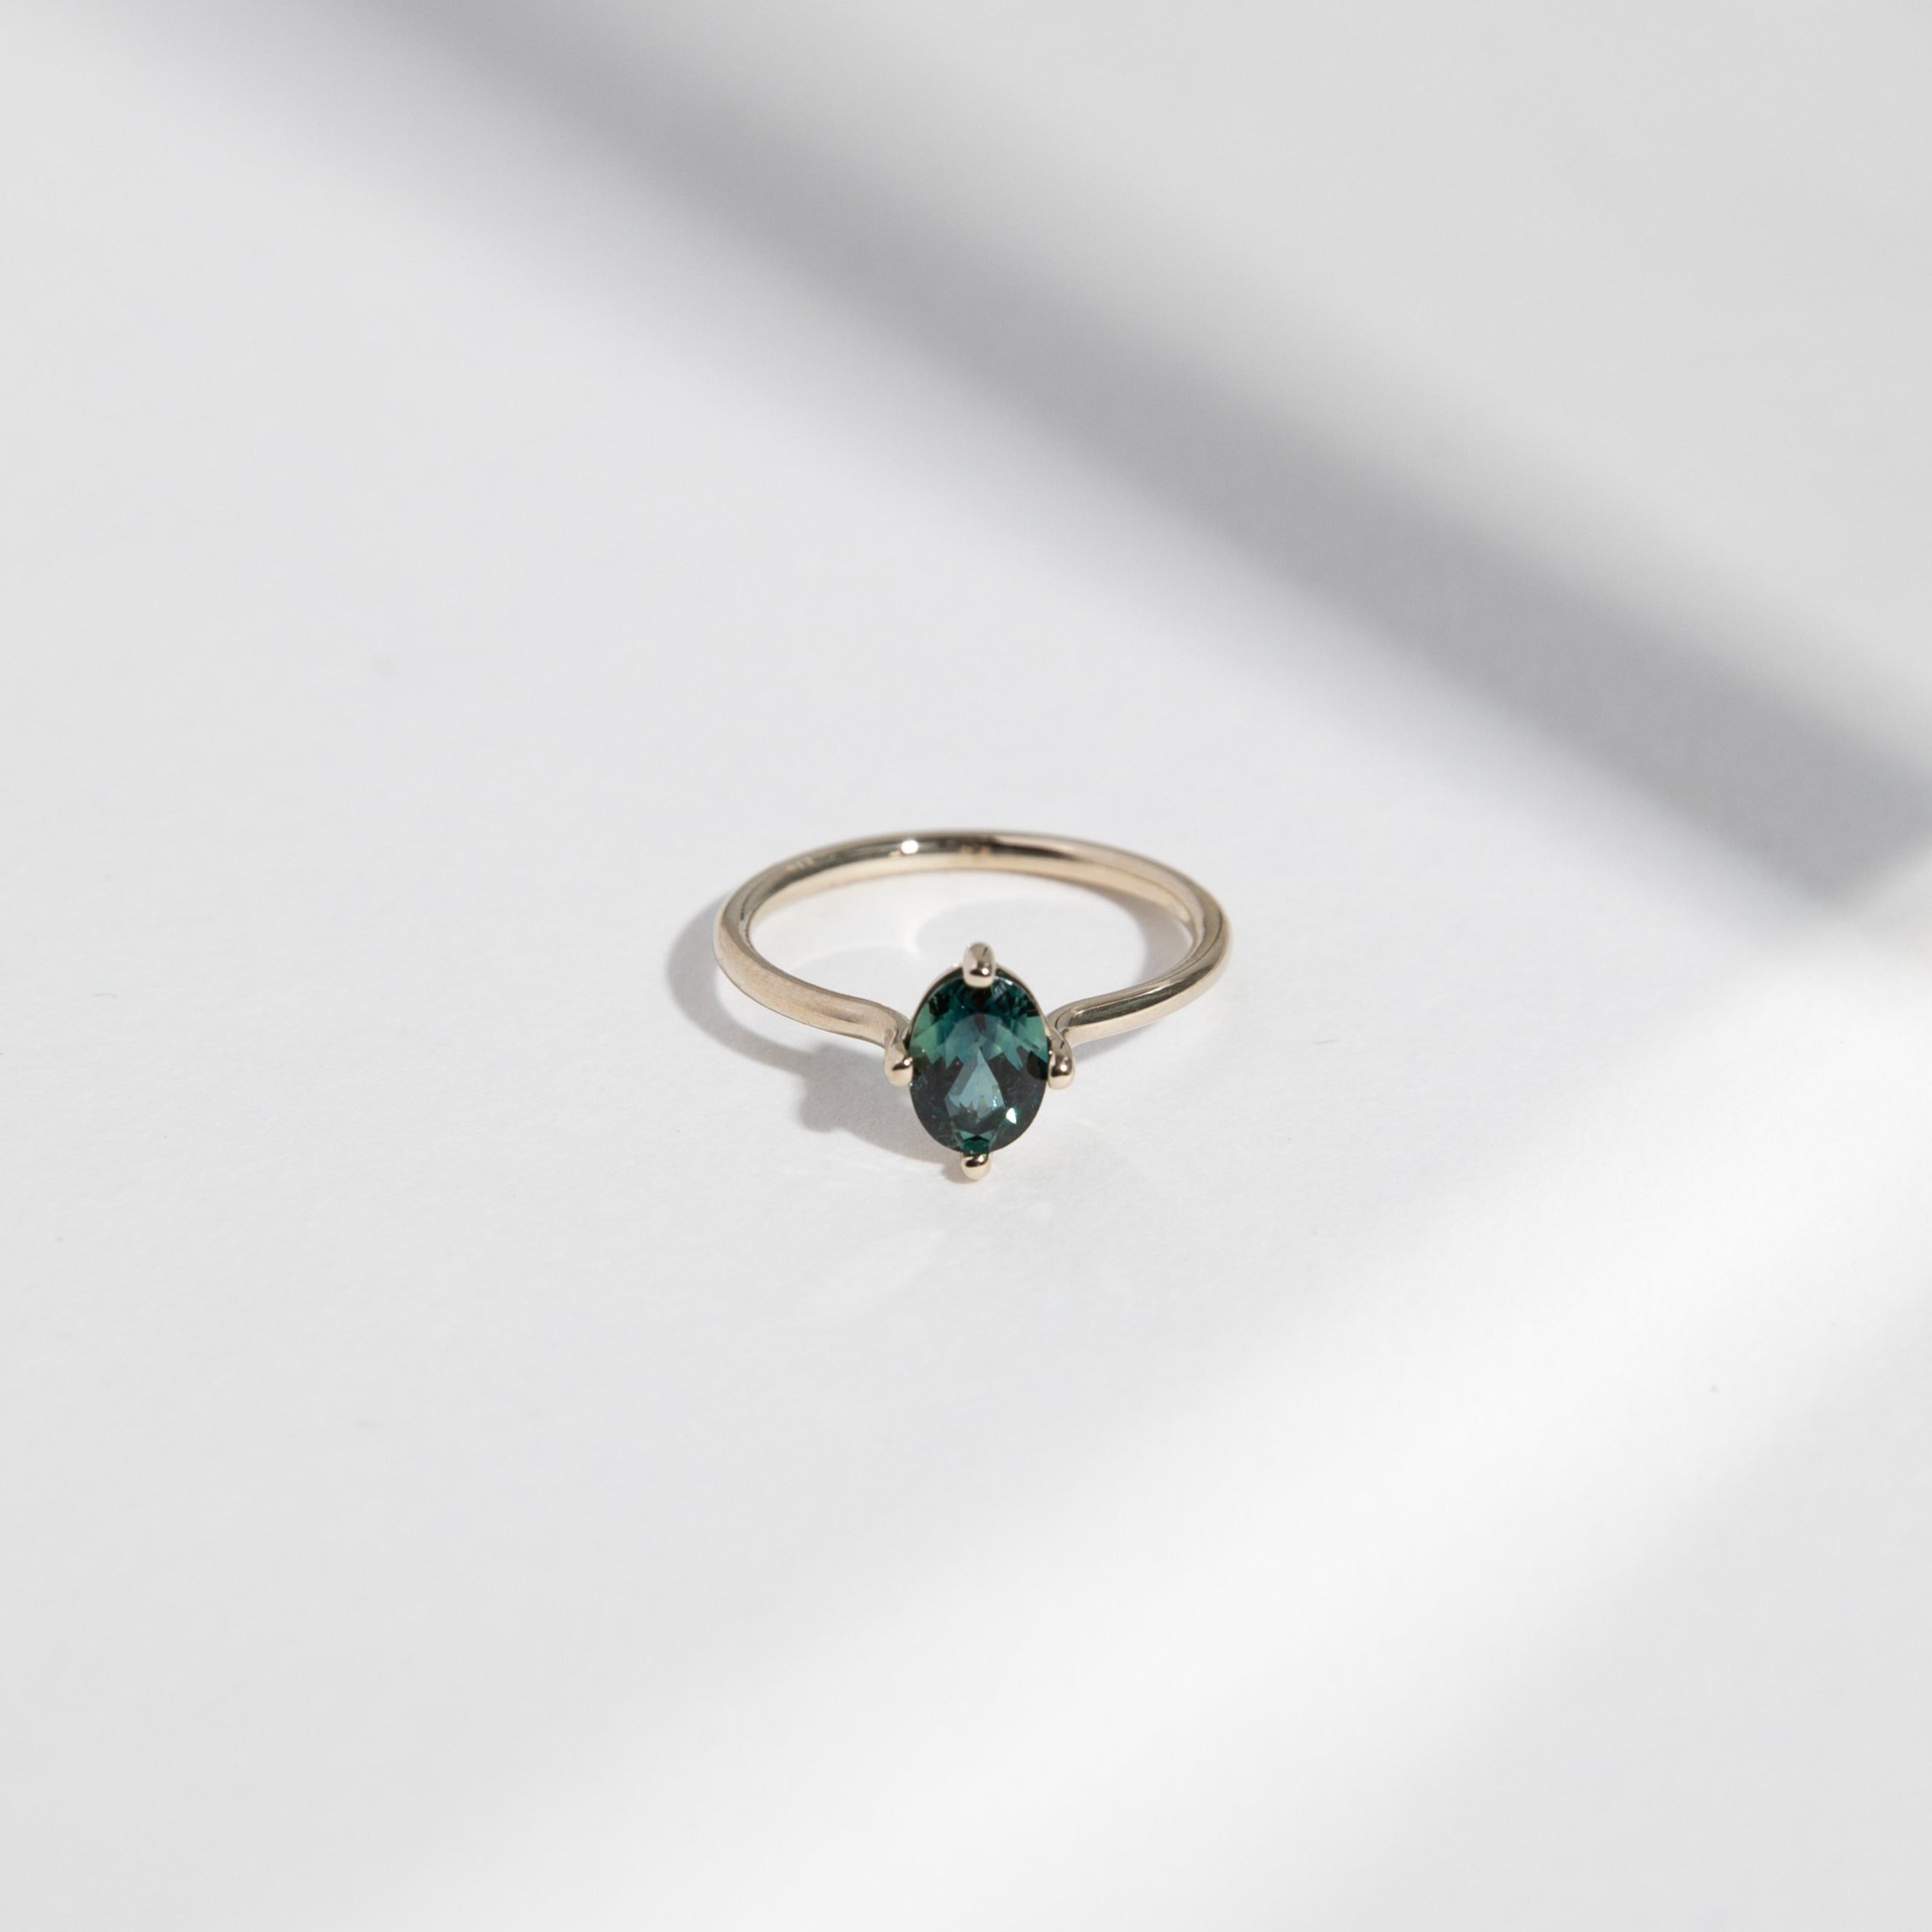 Veli Thin Ring in 14k White Gold set with a 1ct green oval cut sapphire By SHW Fine Jewelry New York City